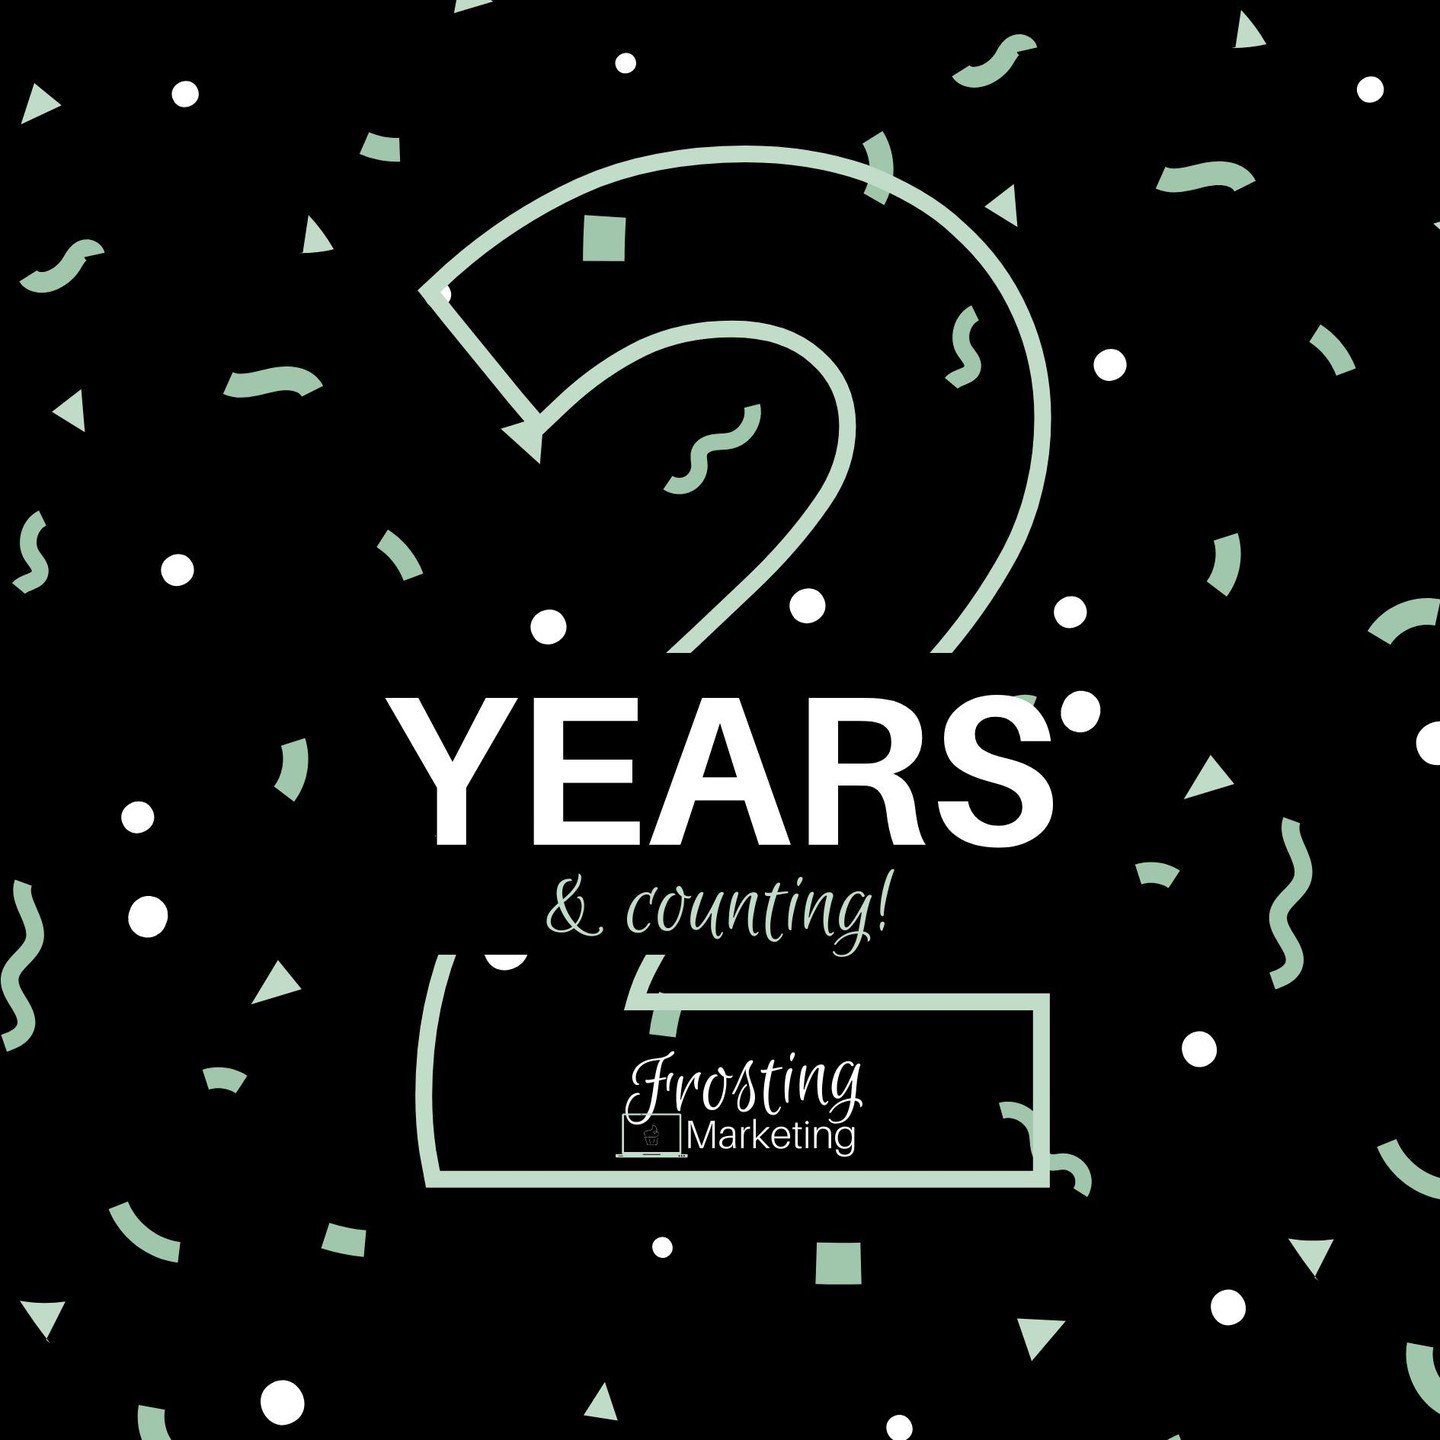 Celebrating 2 years of Frosting Marketing! 🎉💻🧁 I'm forever blown away by the Lord's hand in this business and thankful to each of my clients for their incredible partnerships. 

Since becoming a business owner, I've learned that &quot;success&quot